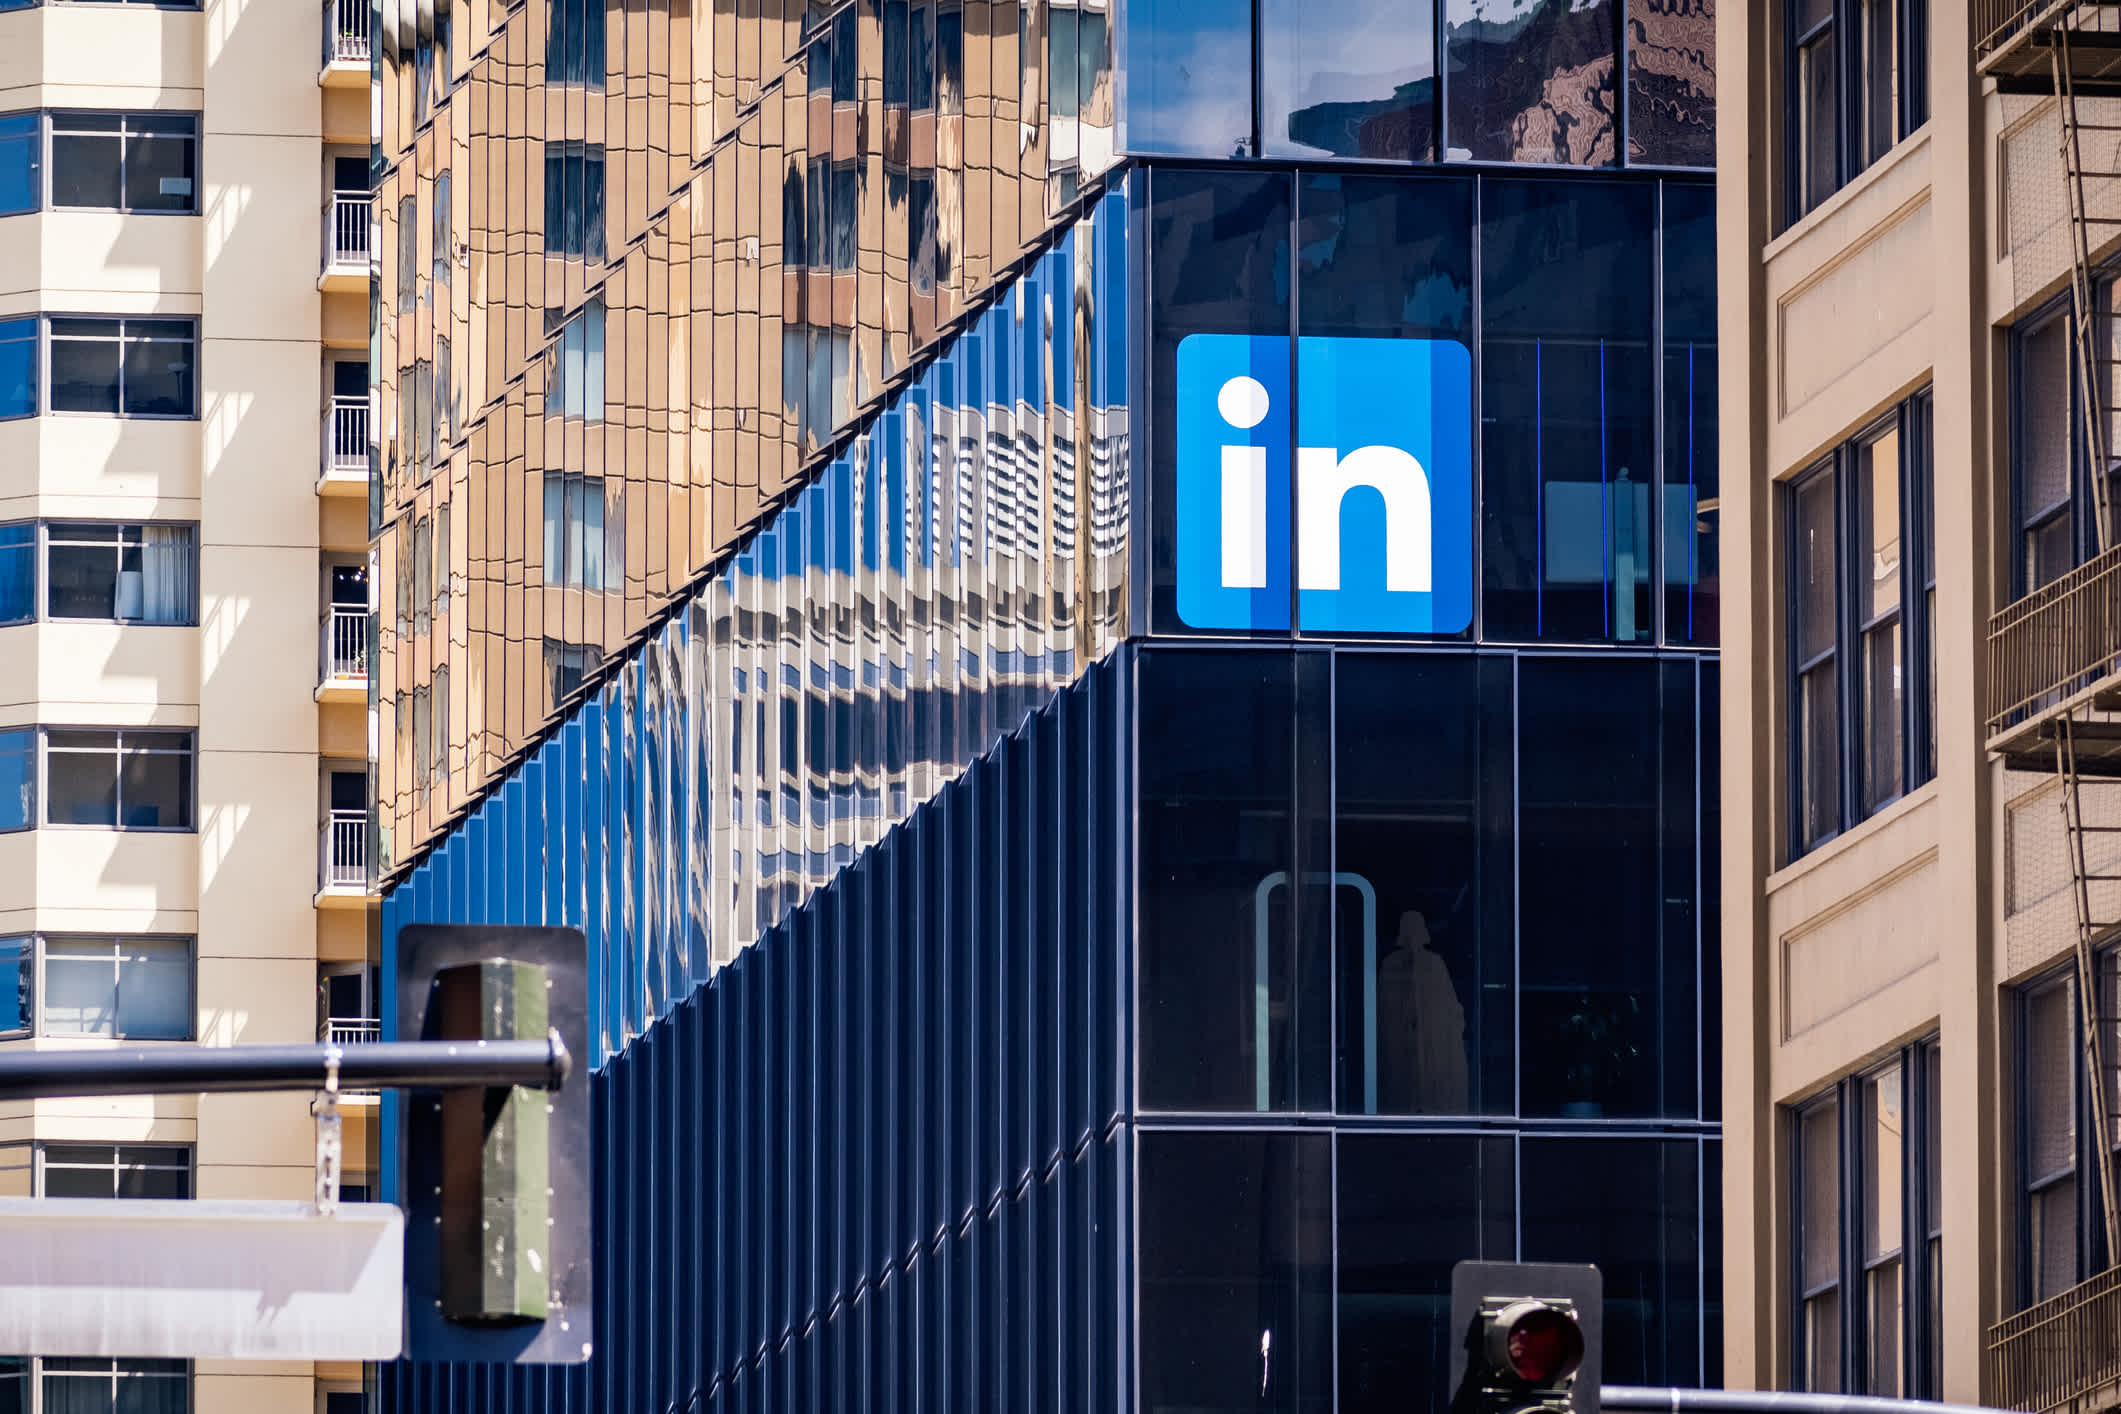 inkedIn offices in downtown San Francisco; LinkedIn is an American business and employment-oriented service and it owned by Microsoft